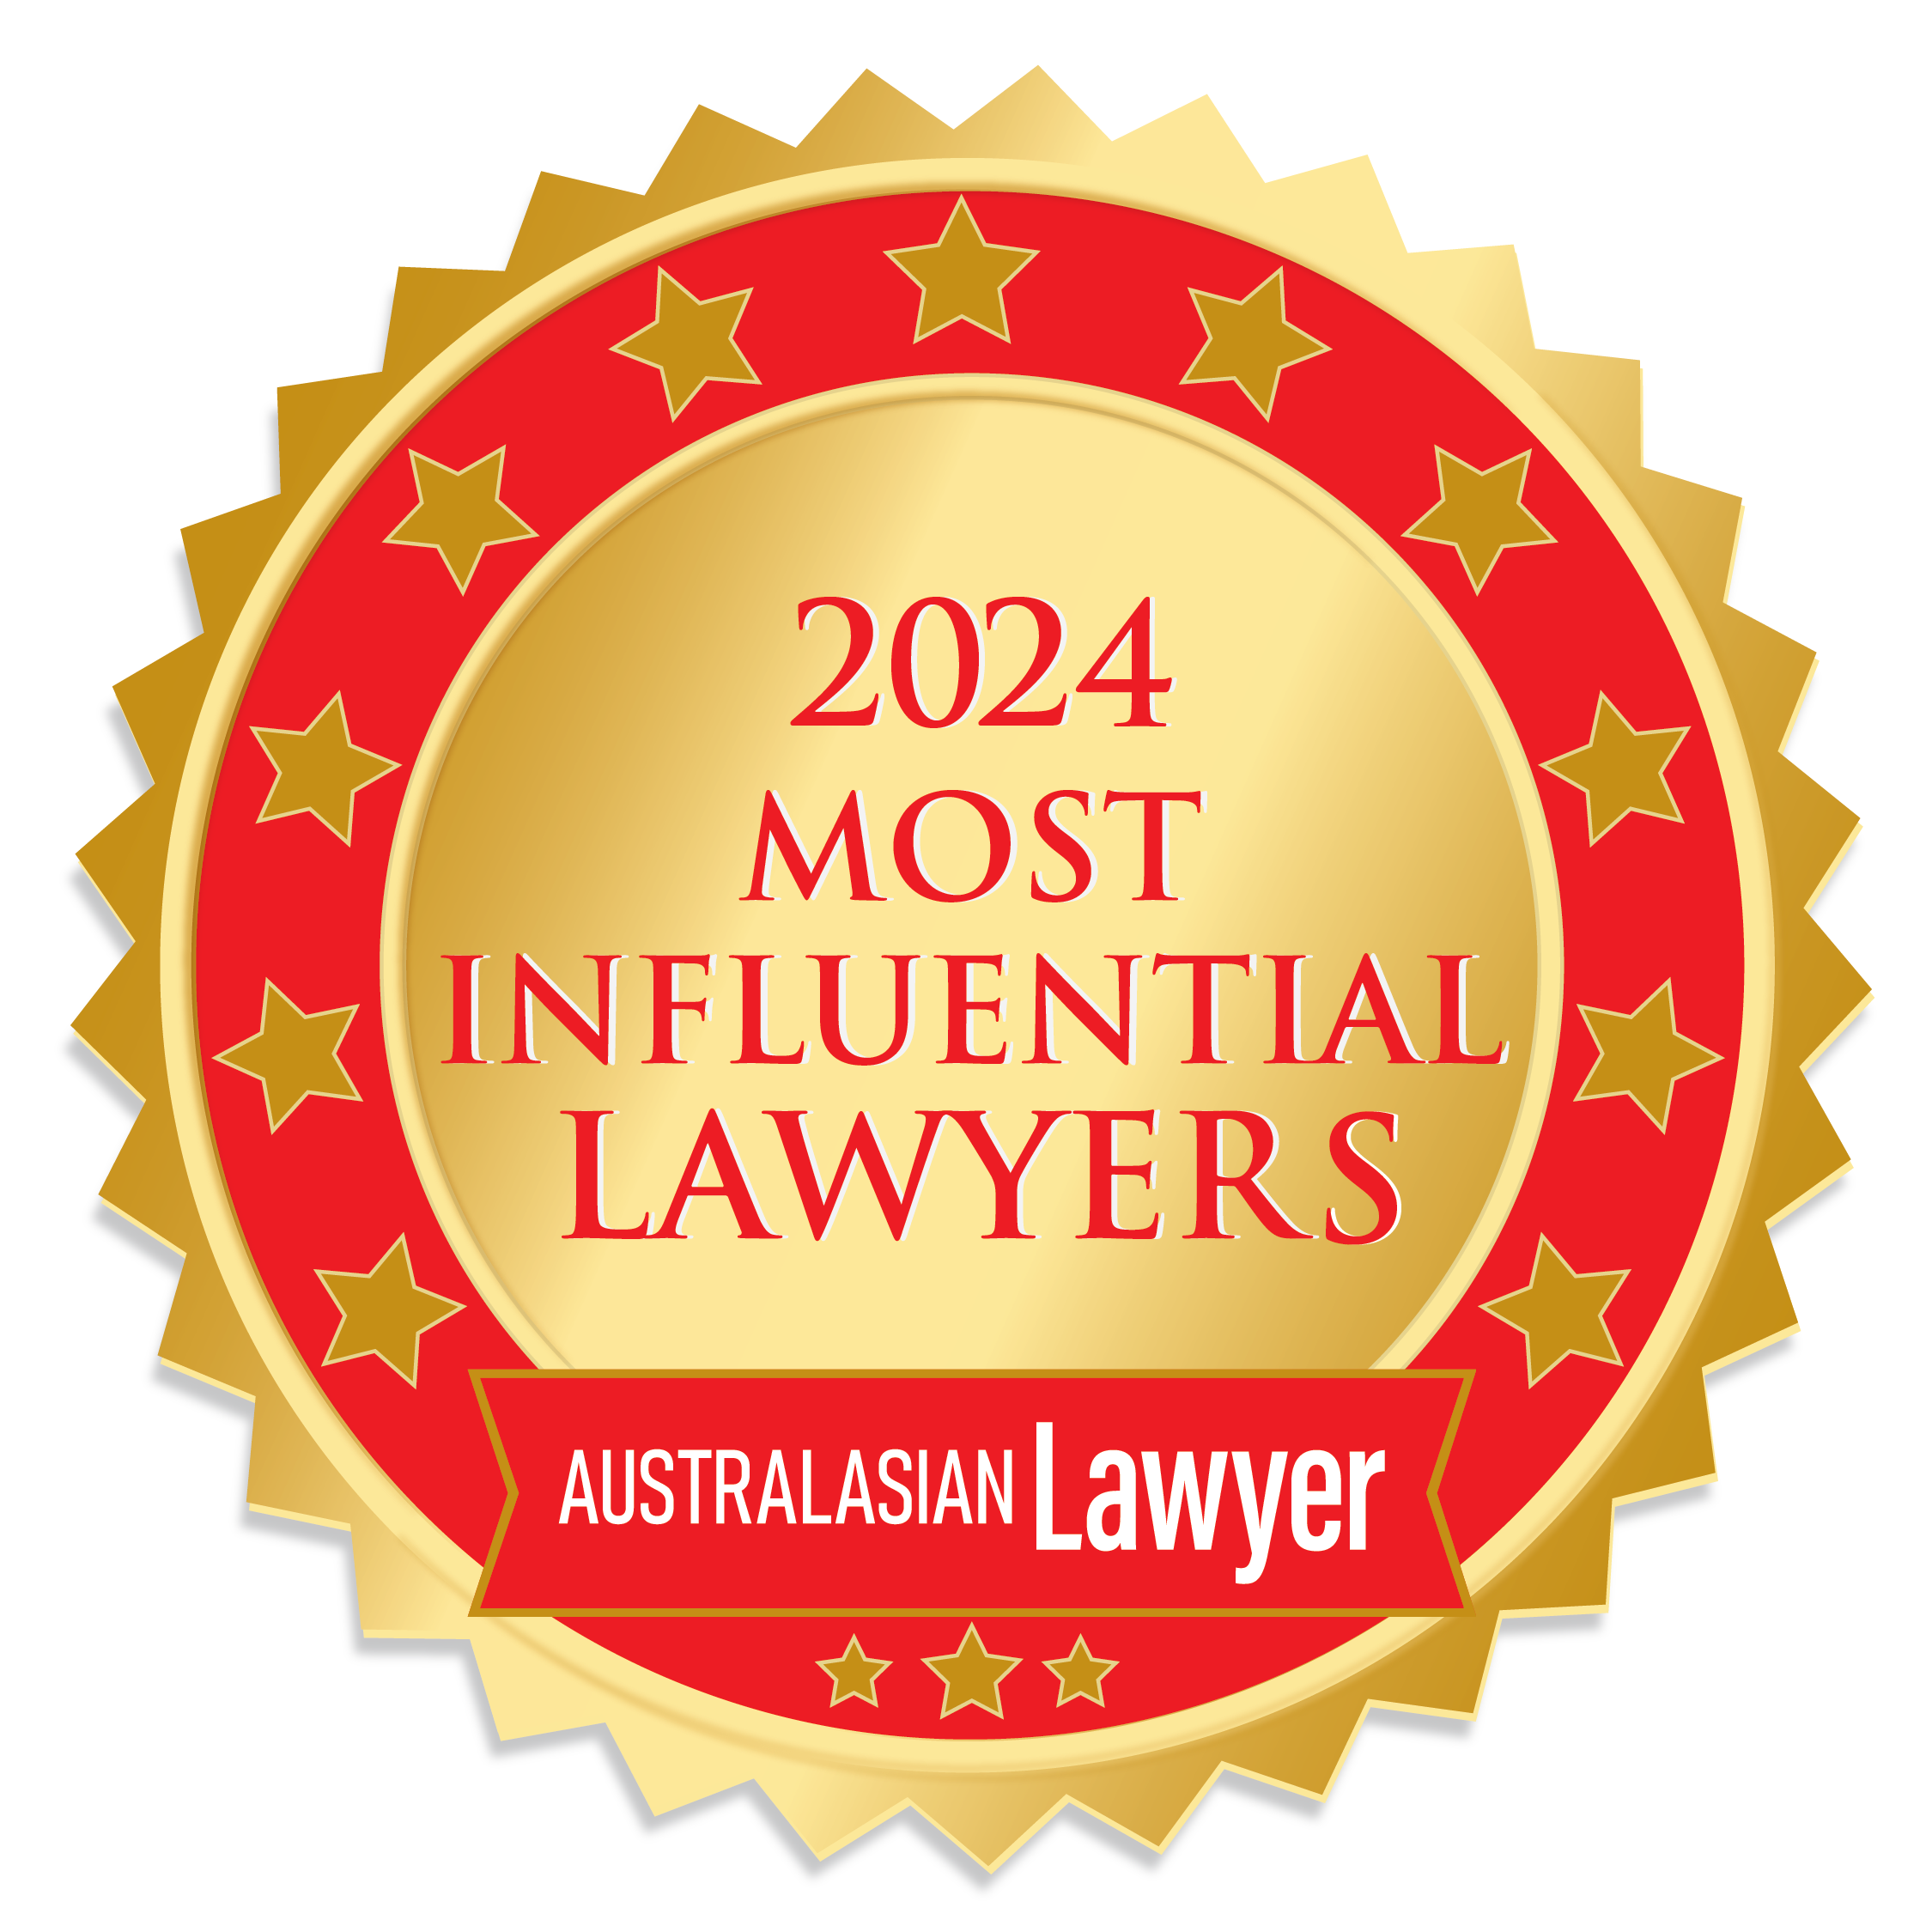 The Most Influential Lawyers in Australia | Most Influential Lawyers